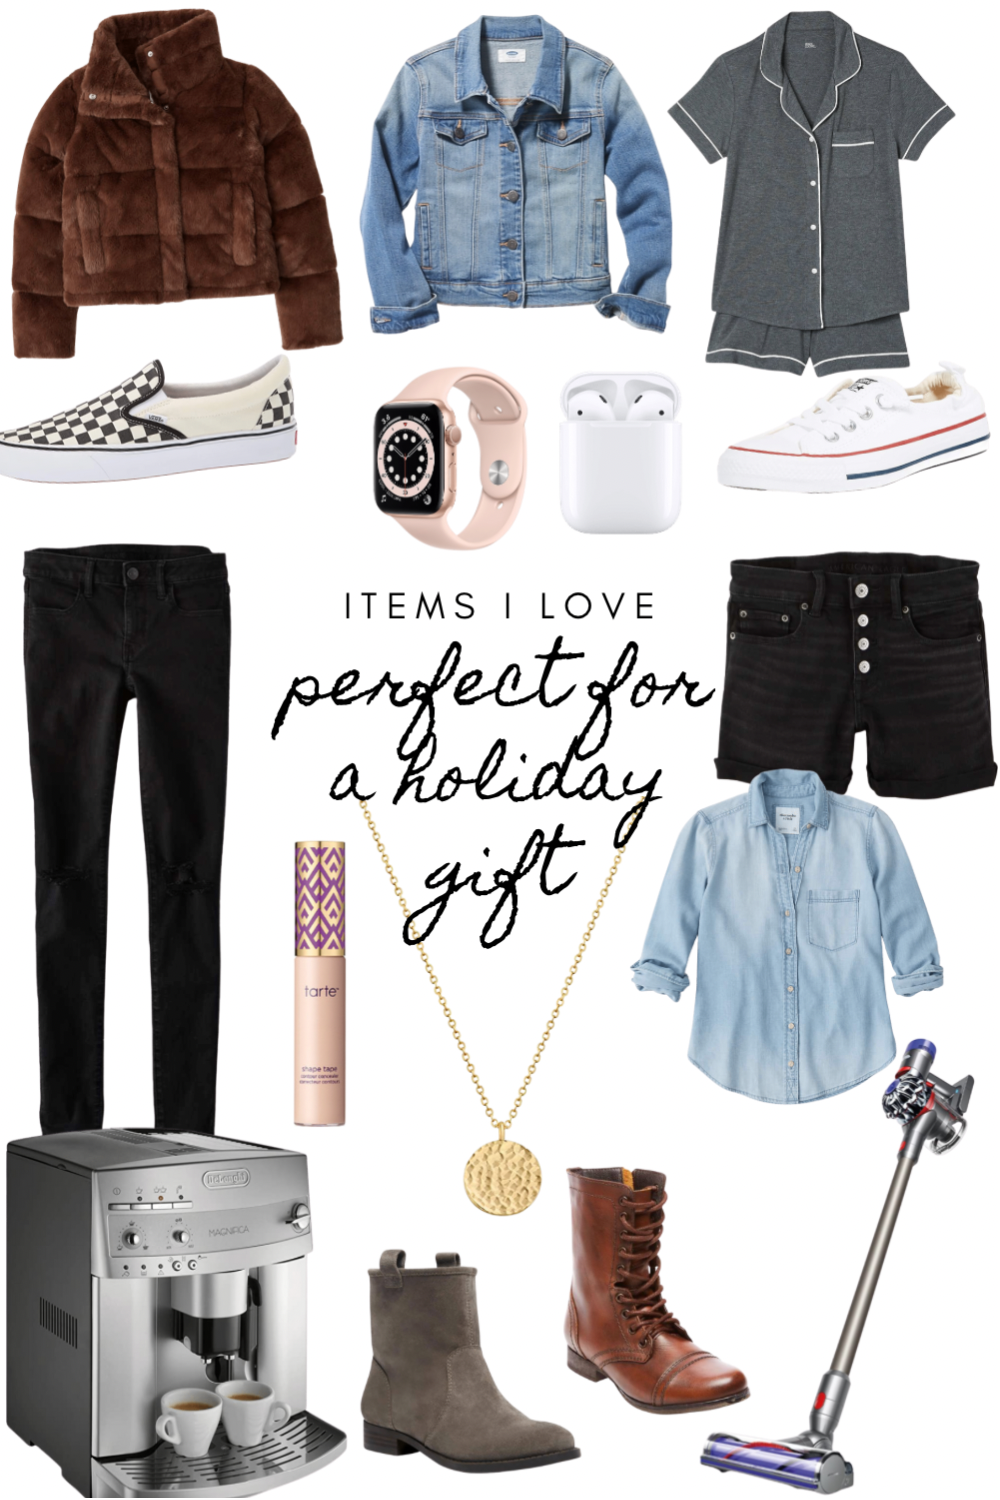 Holiday Gift Guide. Items I love and own